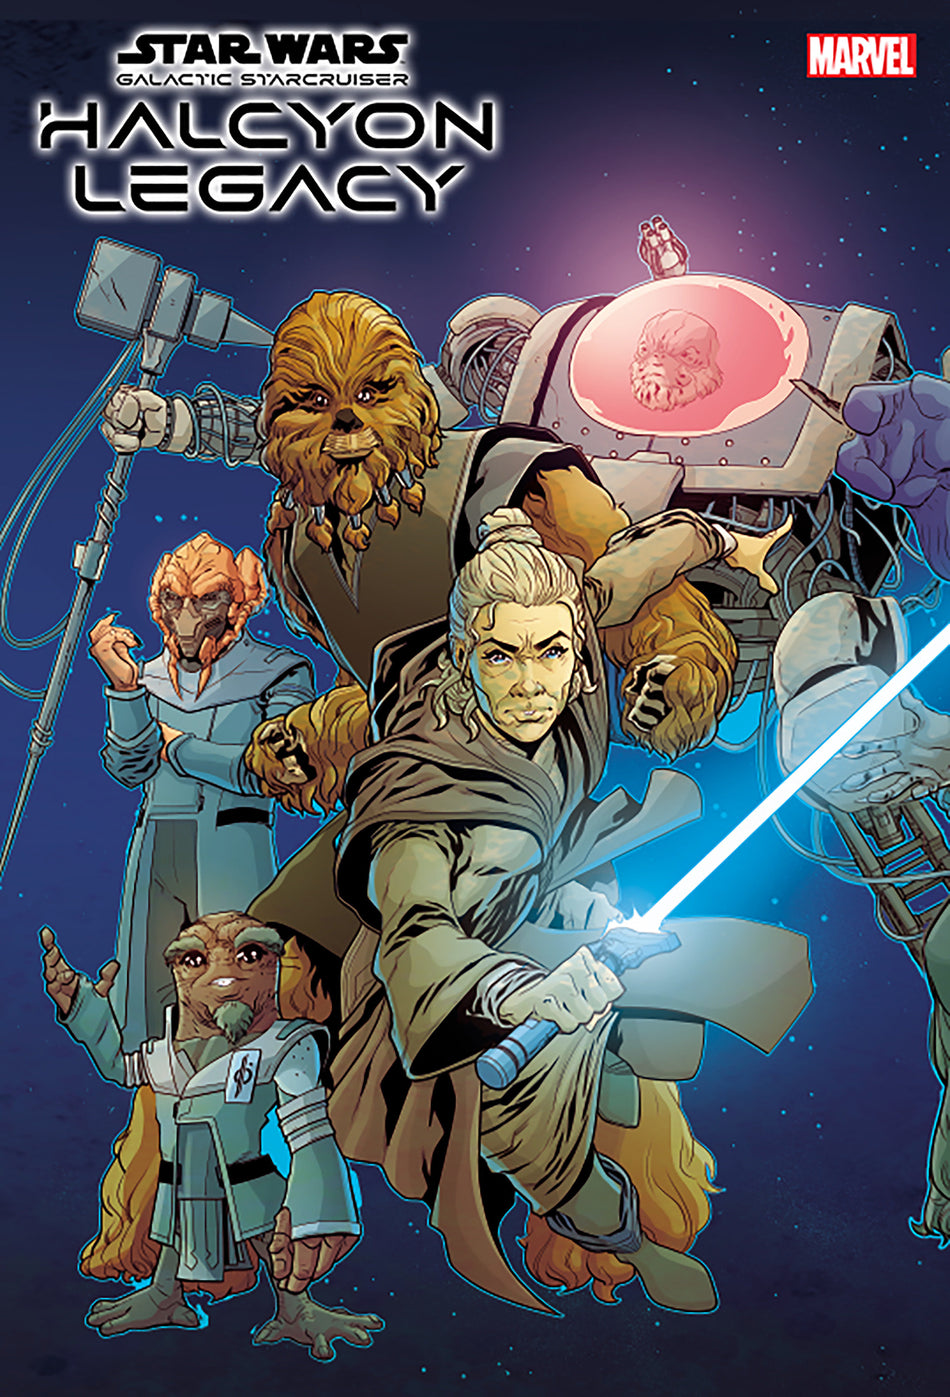 Image of Star Wars The Halcyon Legacy 1 Sliney Connecting Variant comic sold by Stronghold Collectibles.